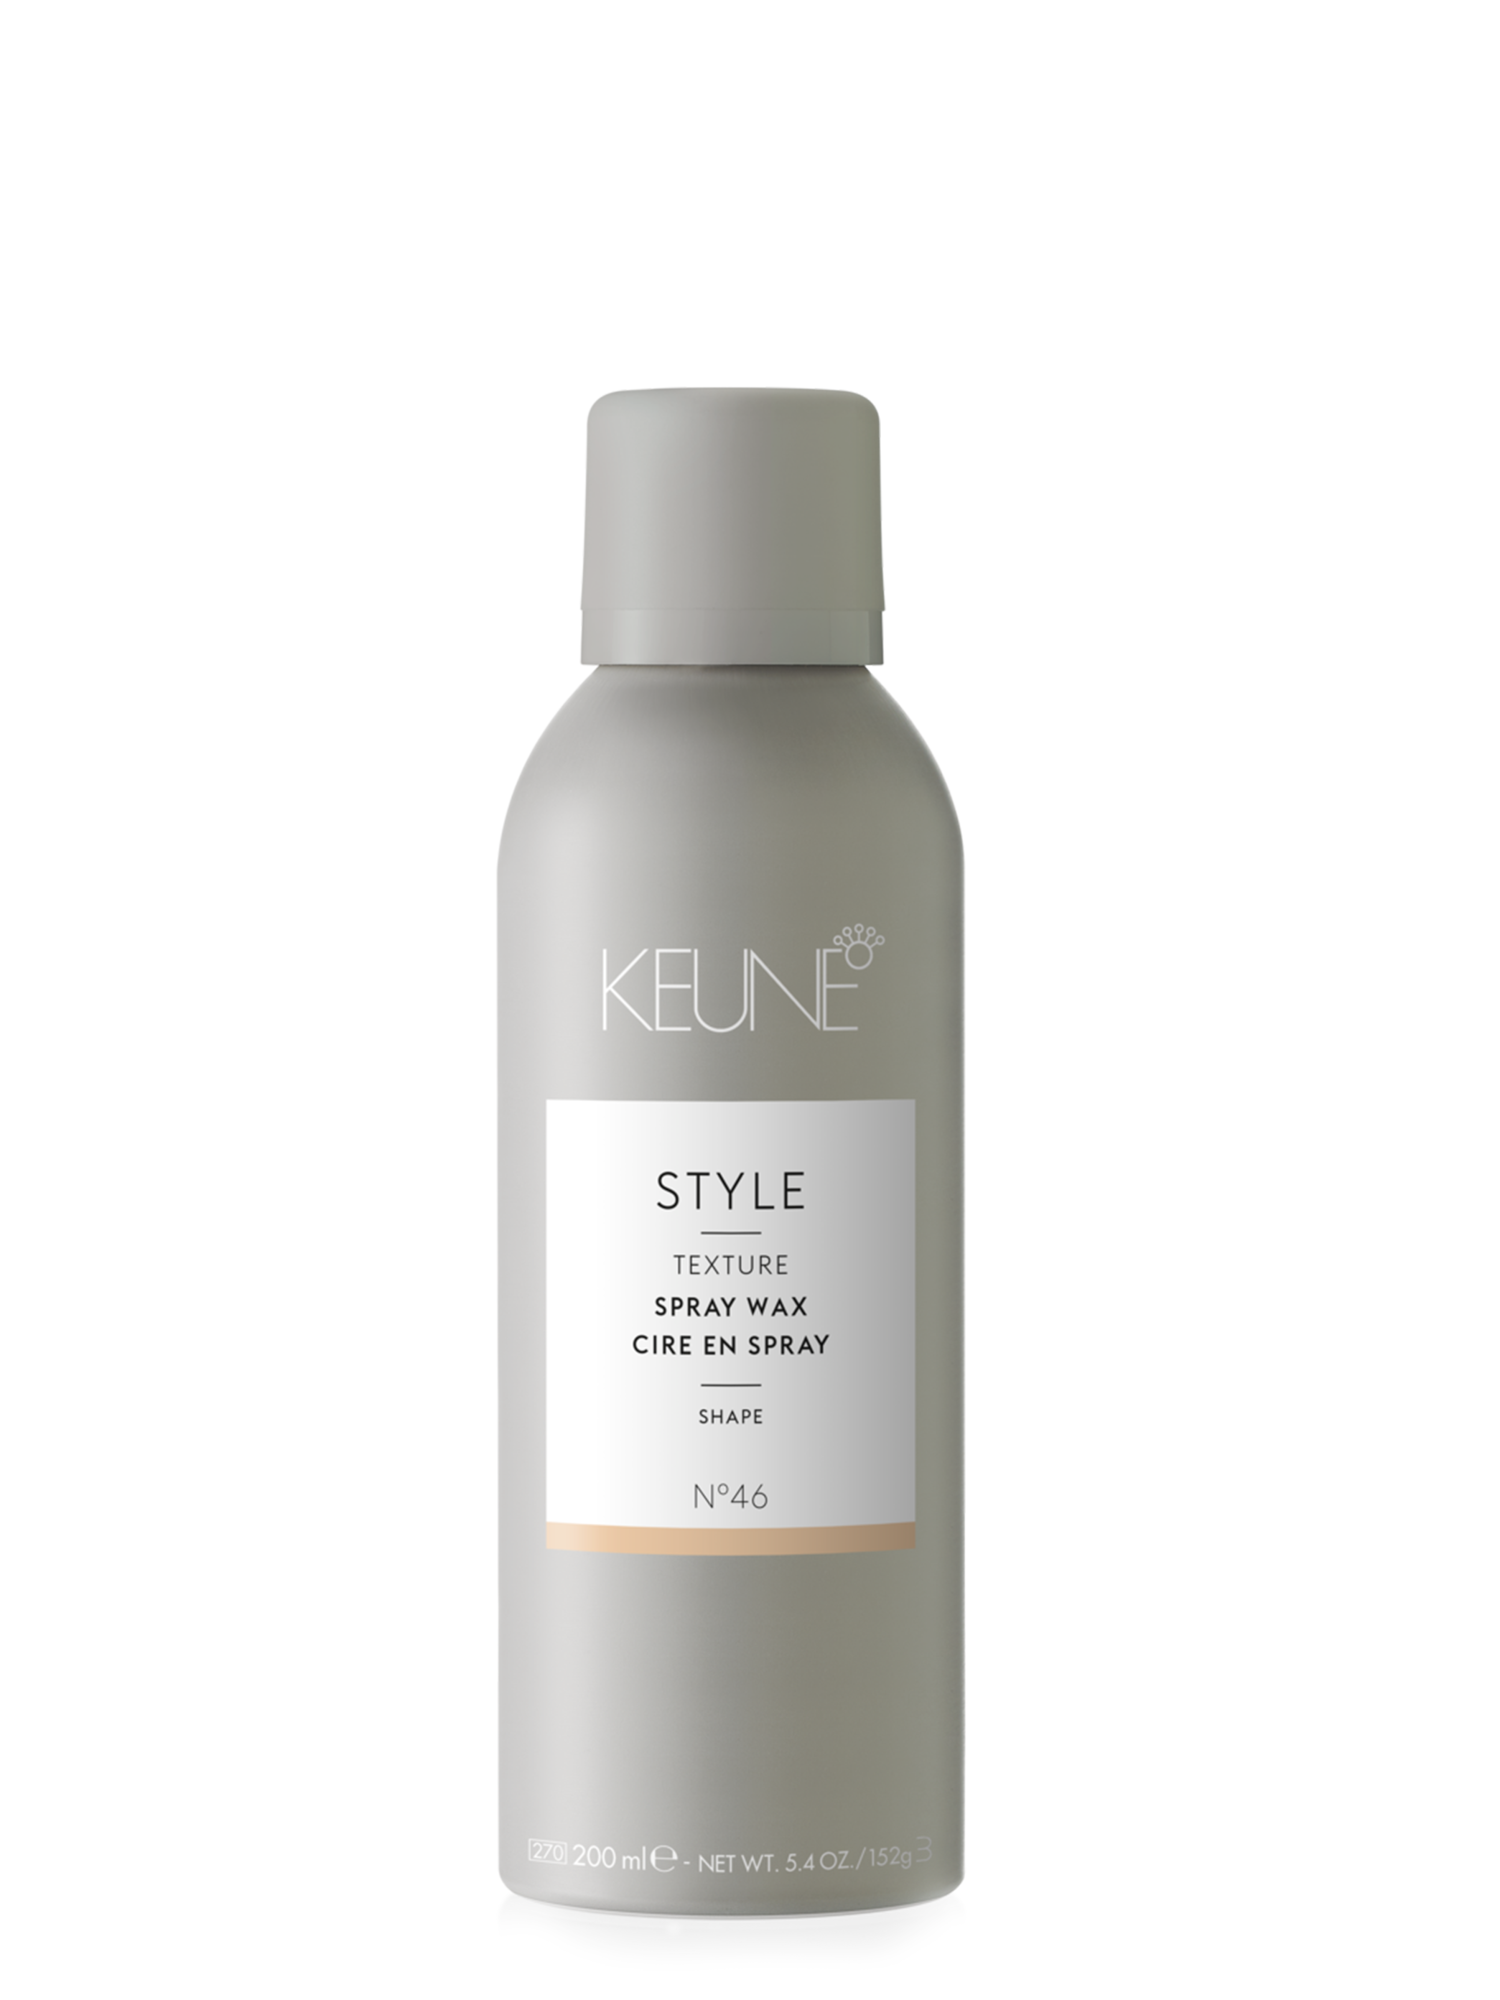 STYLE SPRAY WAX: Non-greasy spray wax for structure, definition, and frizz control. Perfect for voluminous hair and an elegant ponytail. Discover hair wax now on keune.ch!